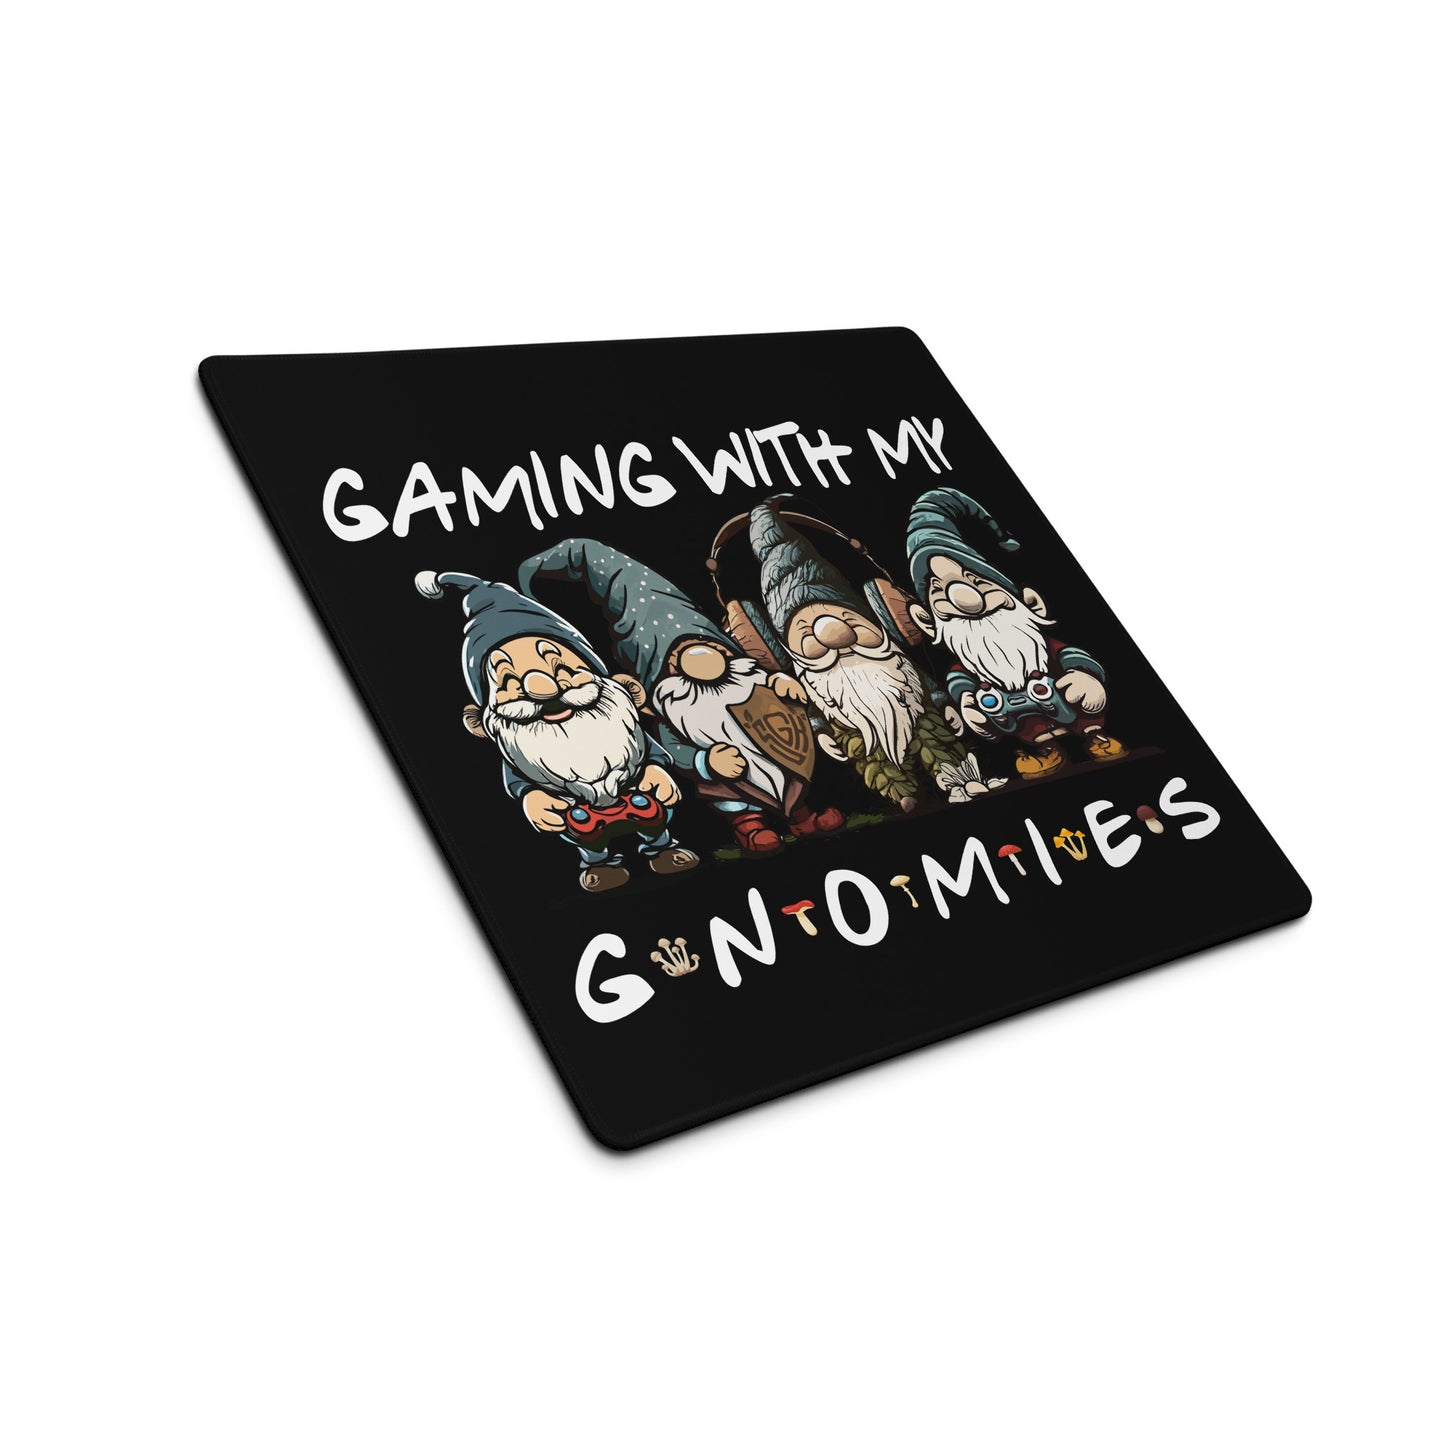 SGK Gaming with my Gnomies 18 x 16 Black Gaming mouse pad